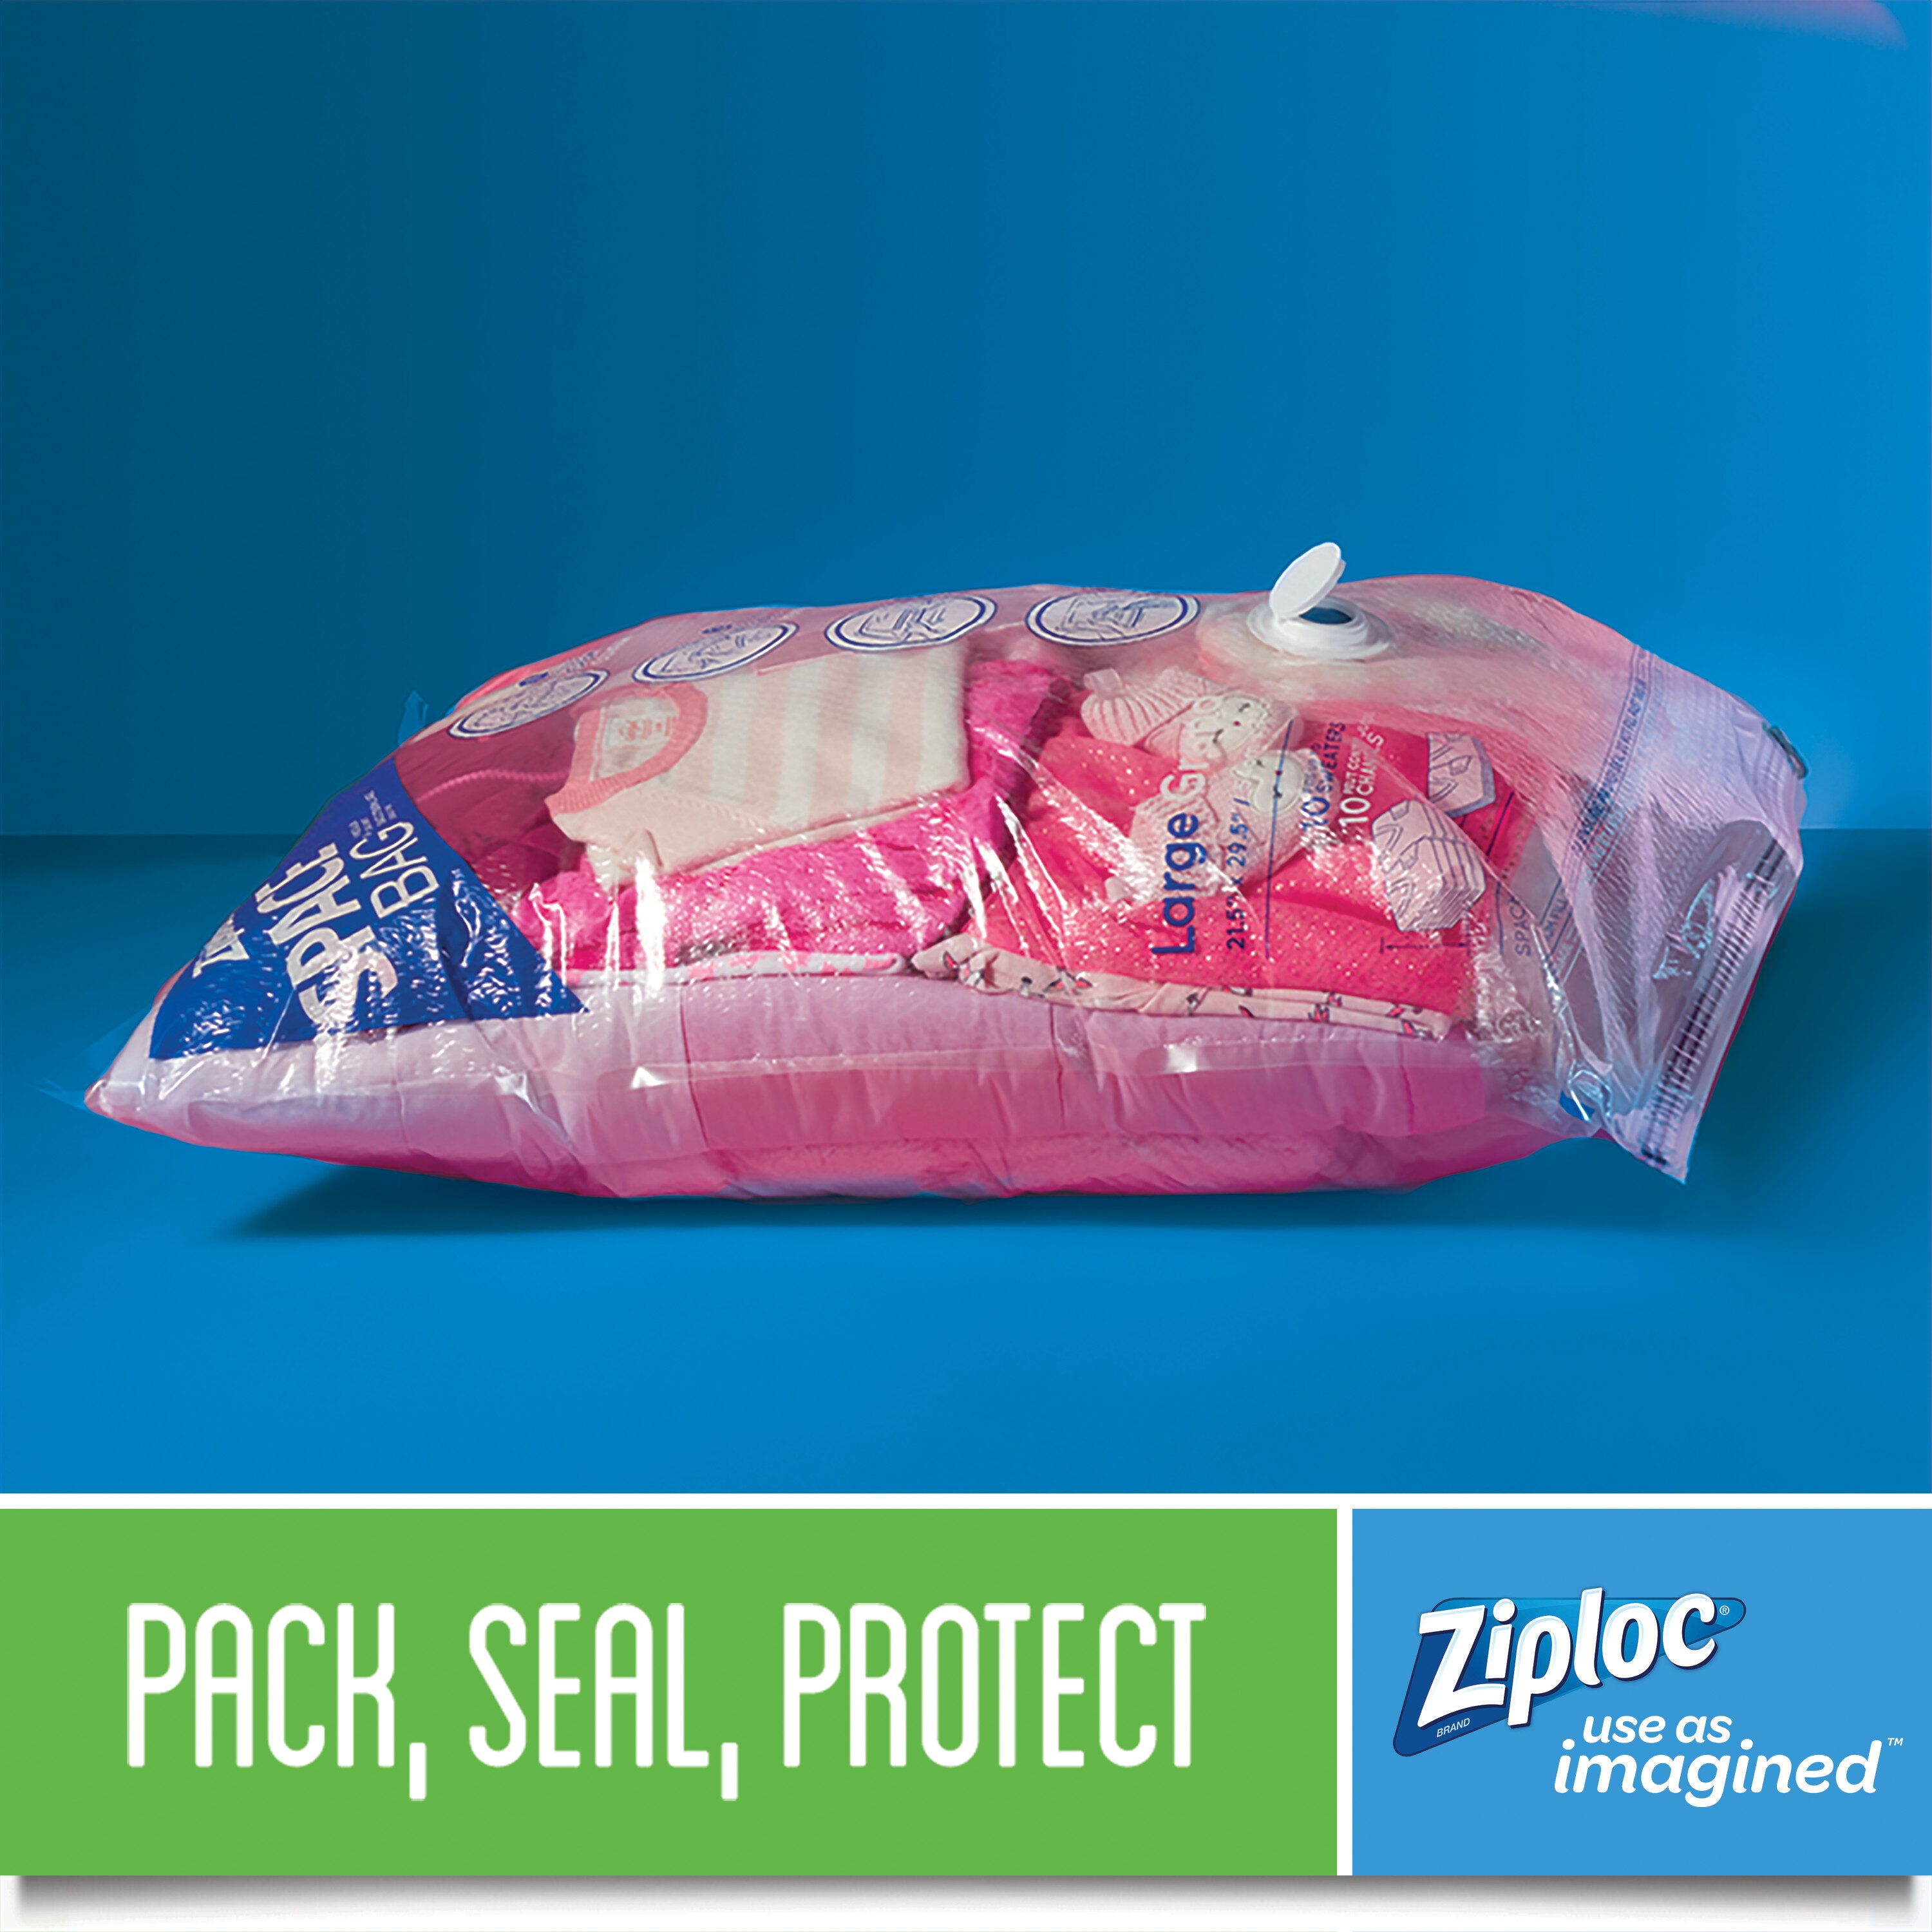 26) Ziploc Storage Bags and Totes - Roller Auctions